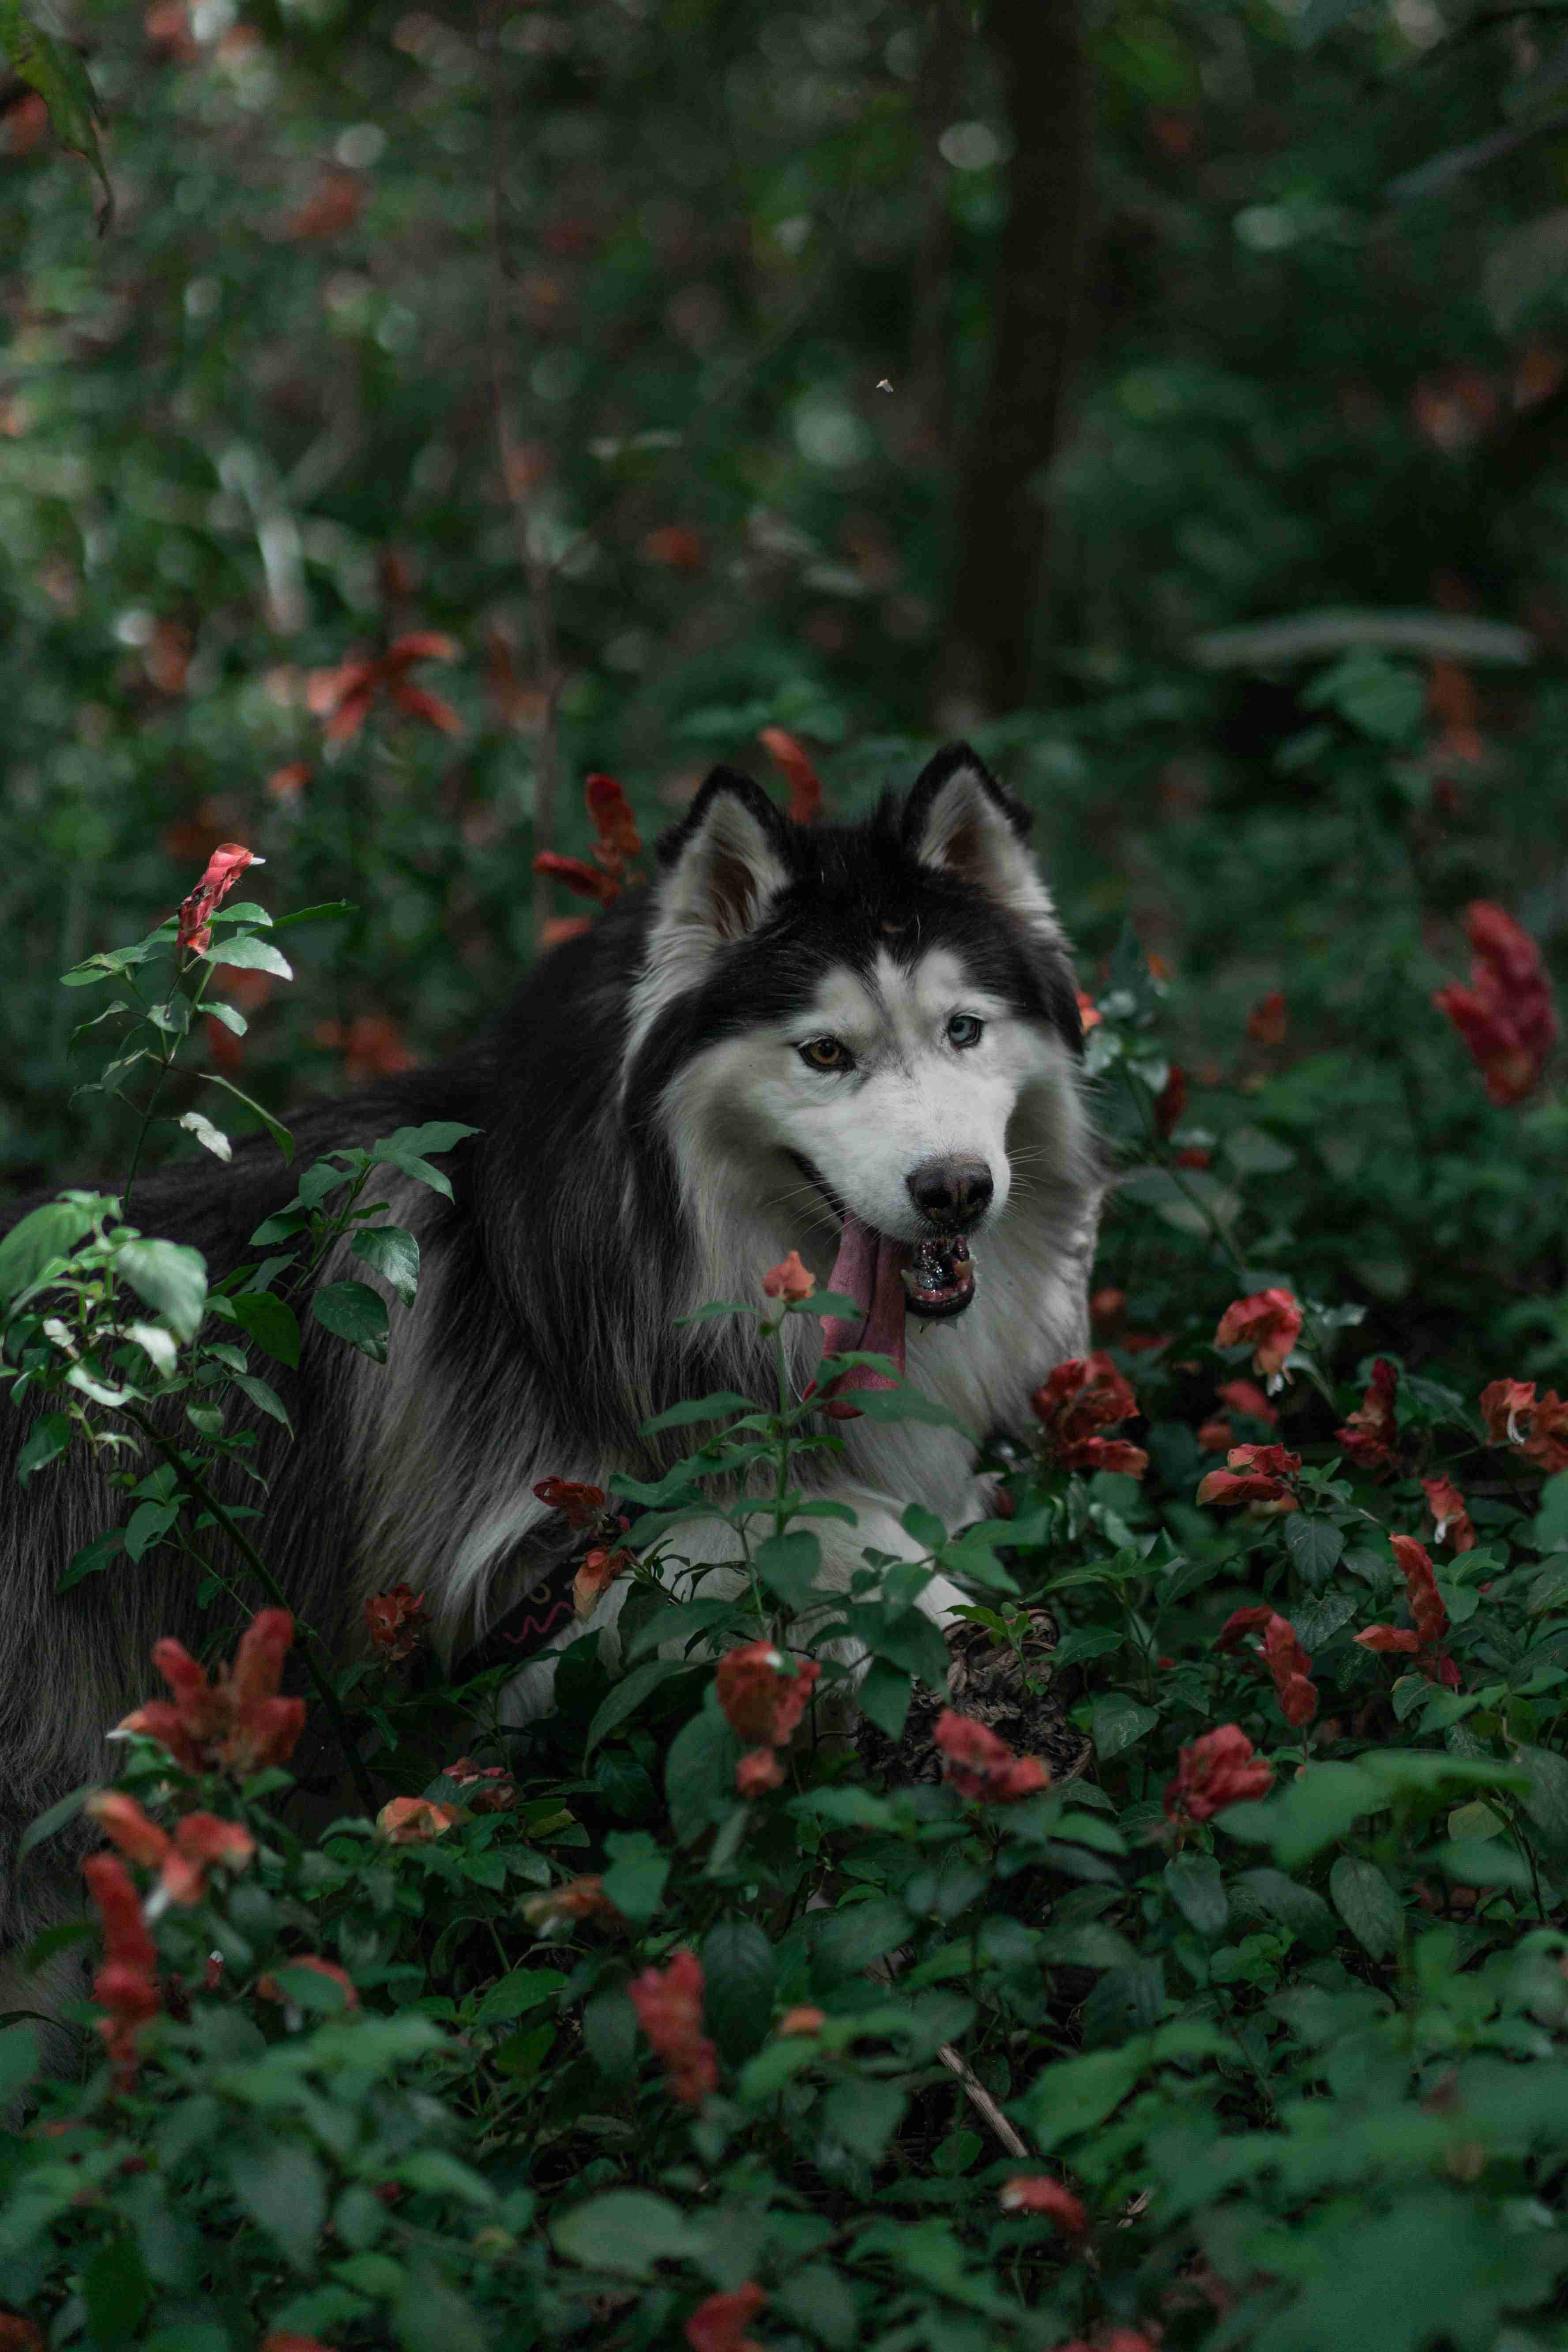 Is an Alaskan Malamute the right dog for first-time owners? A comprehensive guide to know before getting one